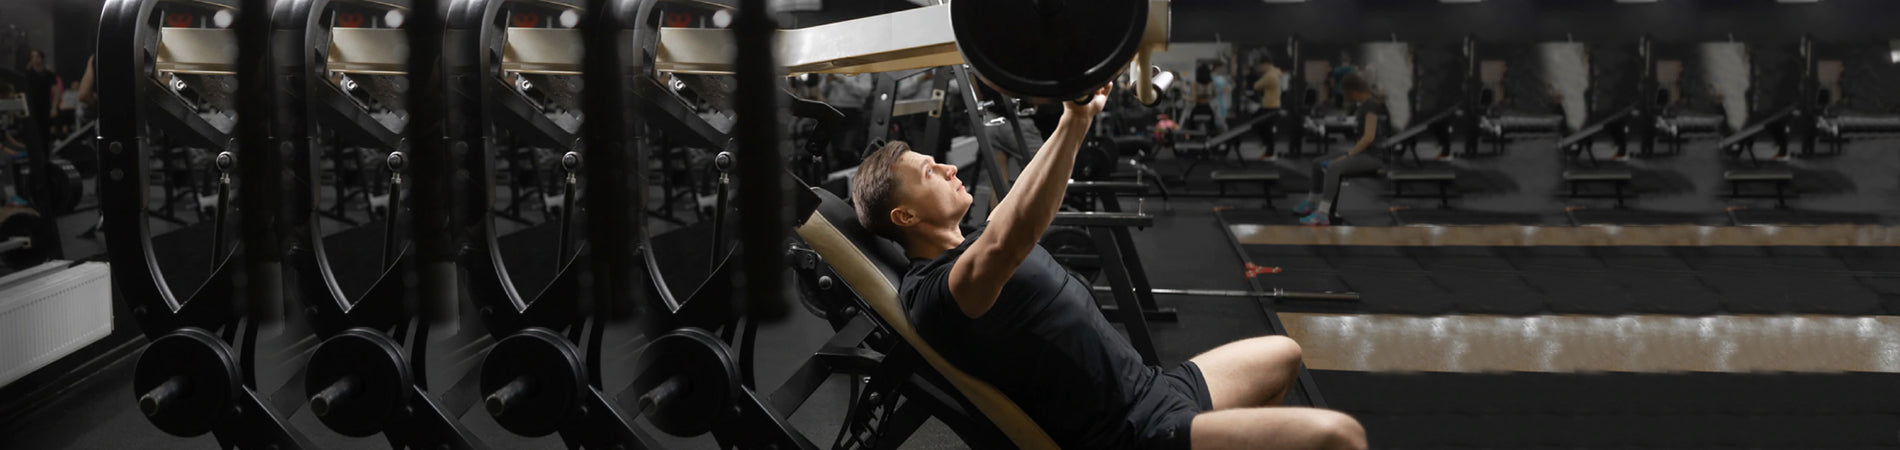 Upper Chest Workouts: All You Need to Know to Build a Massive Upper Chest